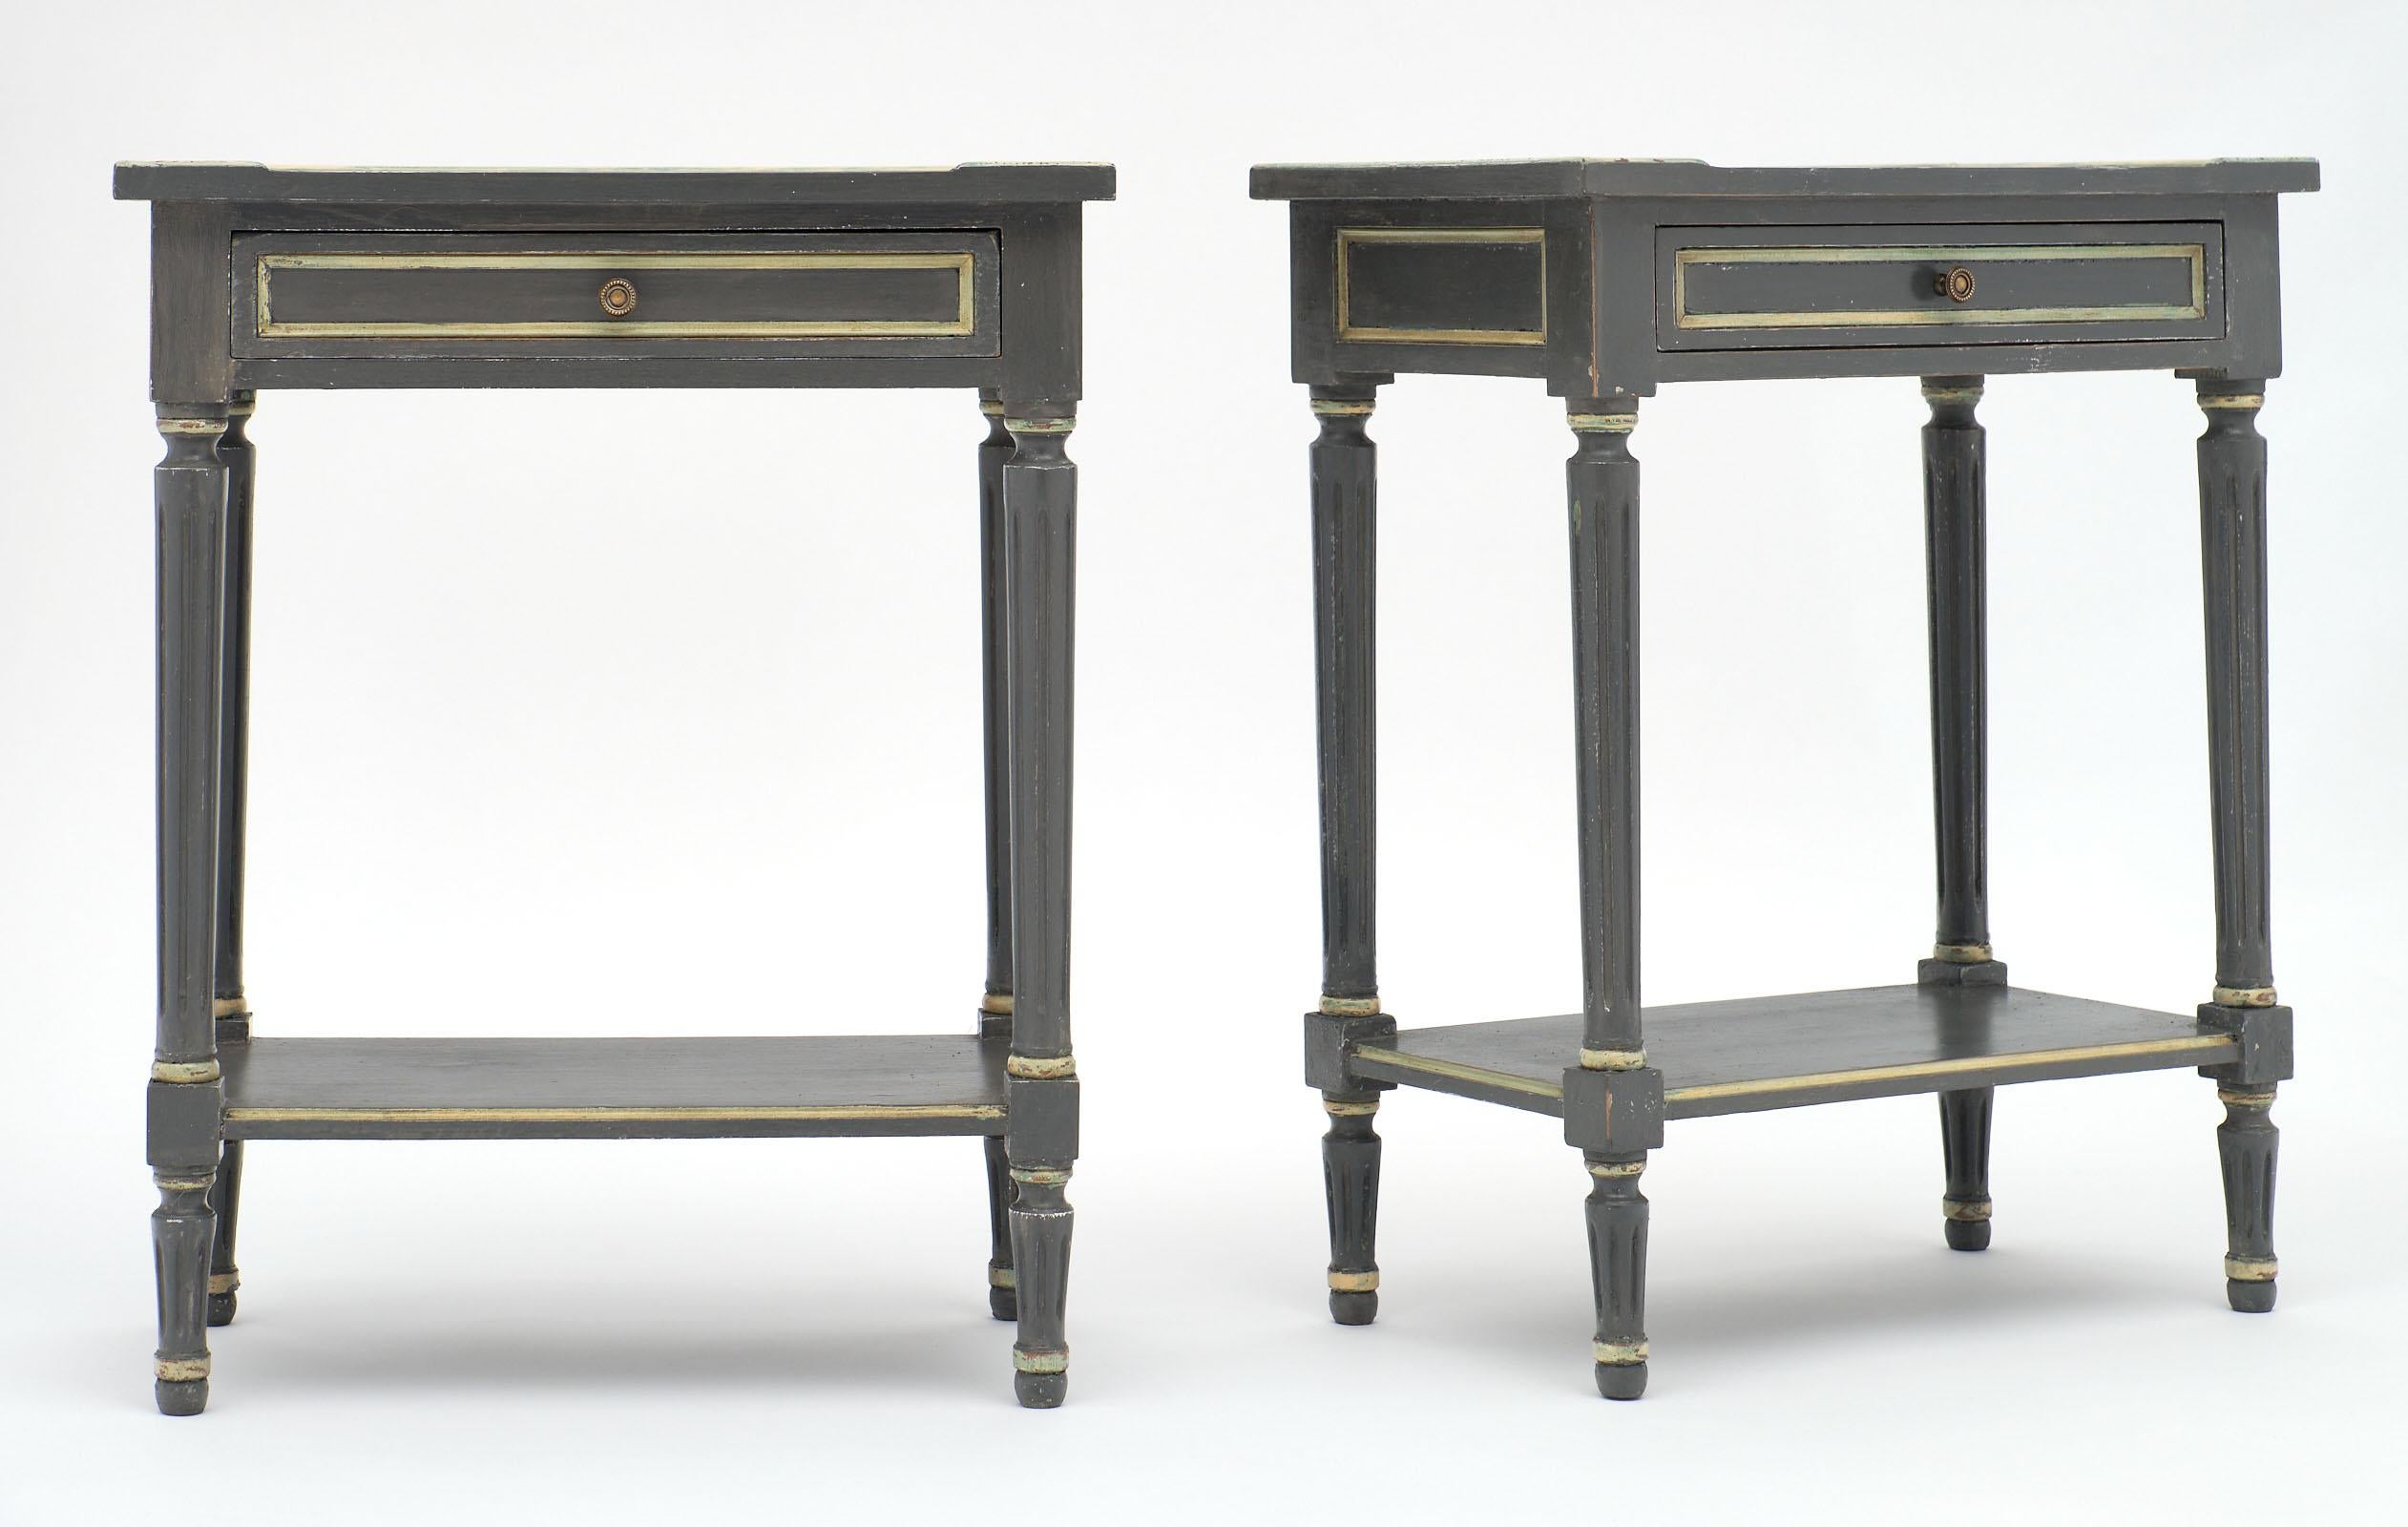 A charming pair of Louis XVI style gray painted side tables made of cherrywood. This pair has been painted in dark gray with light gray painted trim. Each features one dovetailed drawer and original hardware with a shelf below.